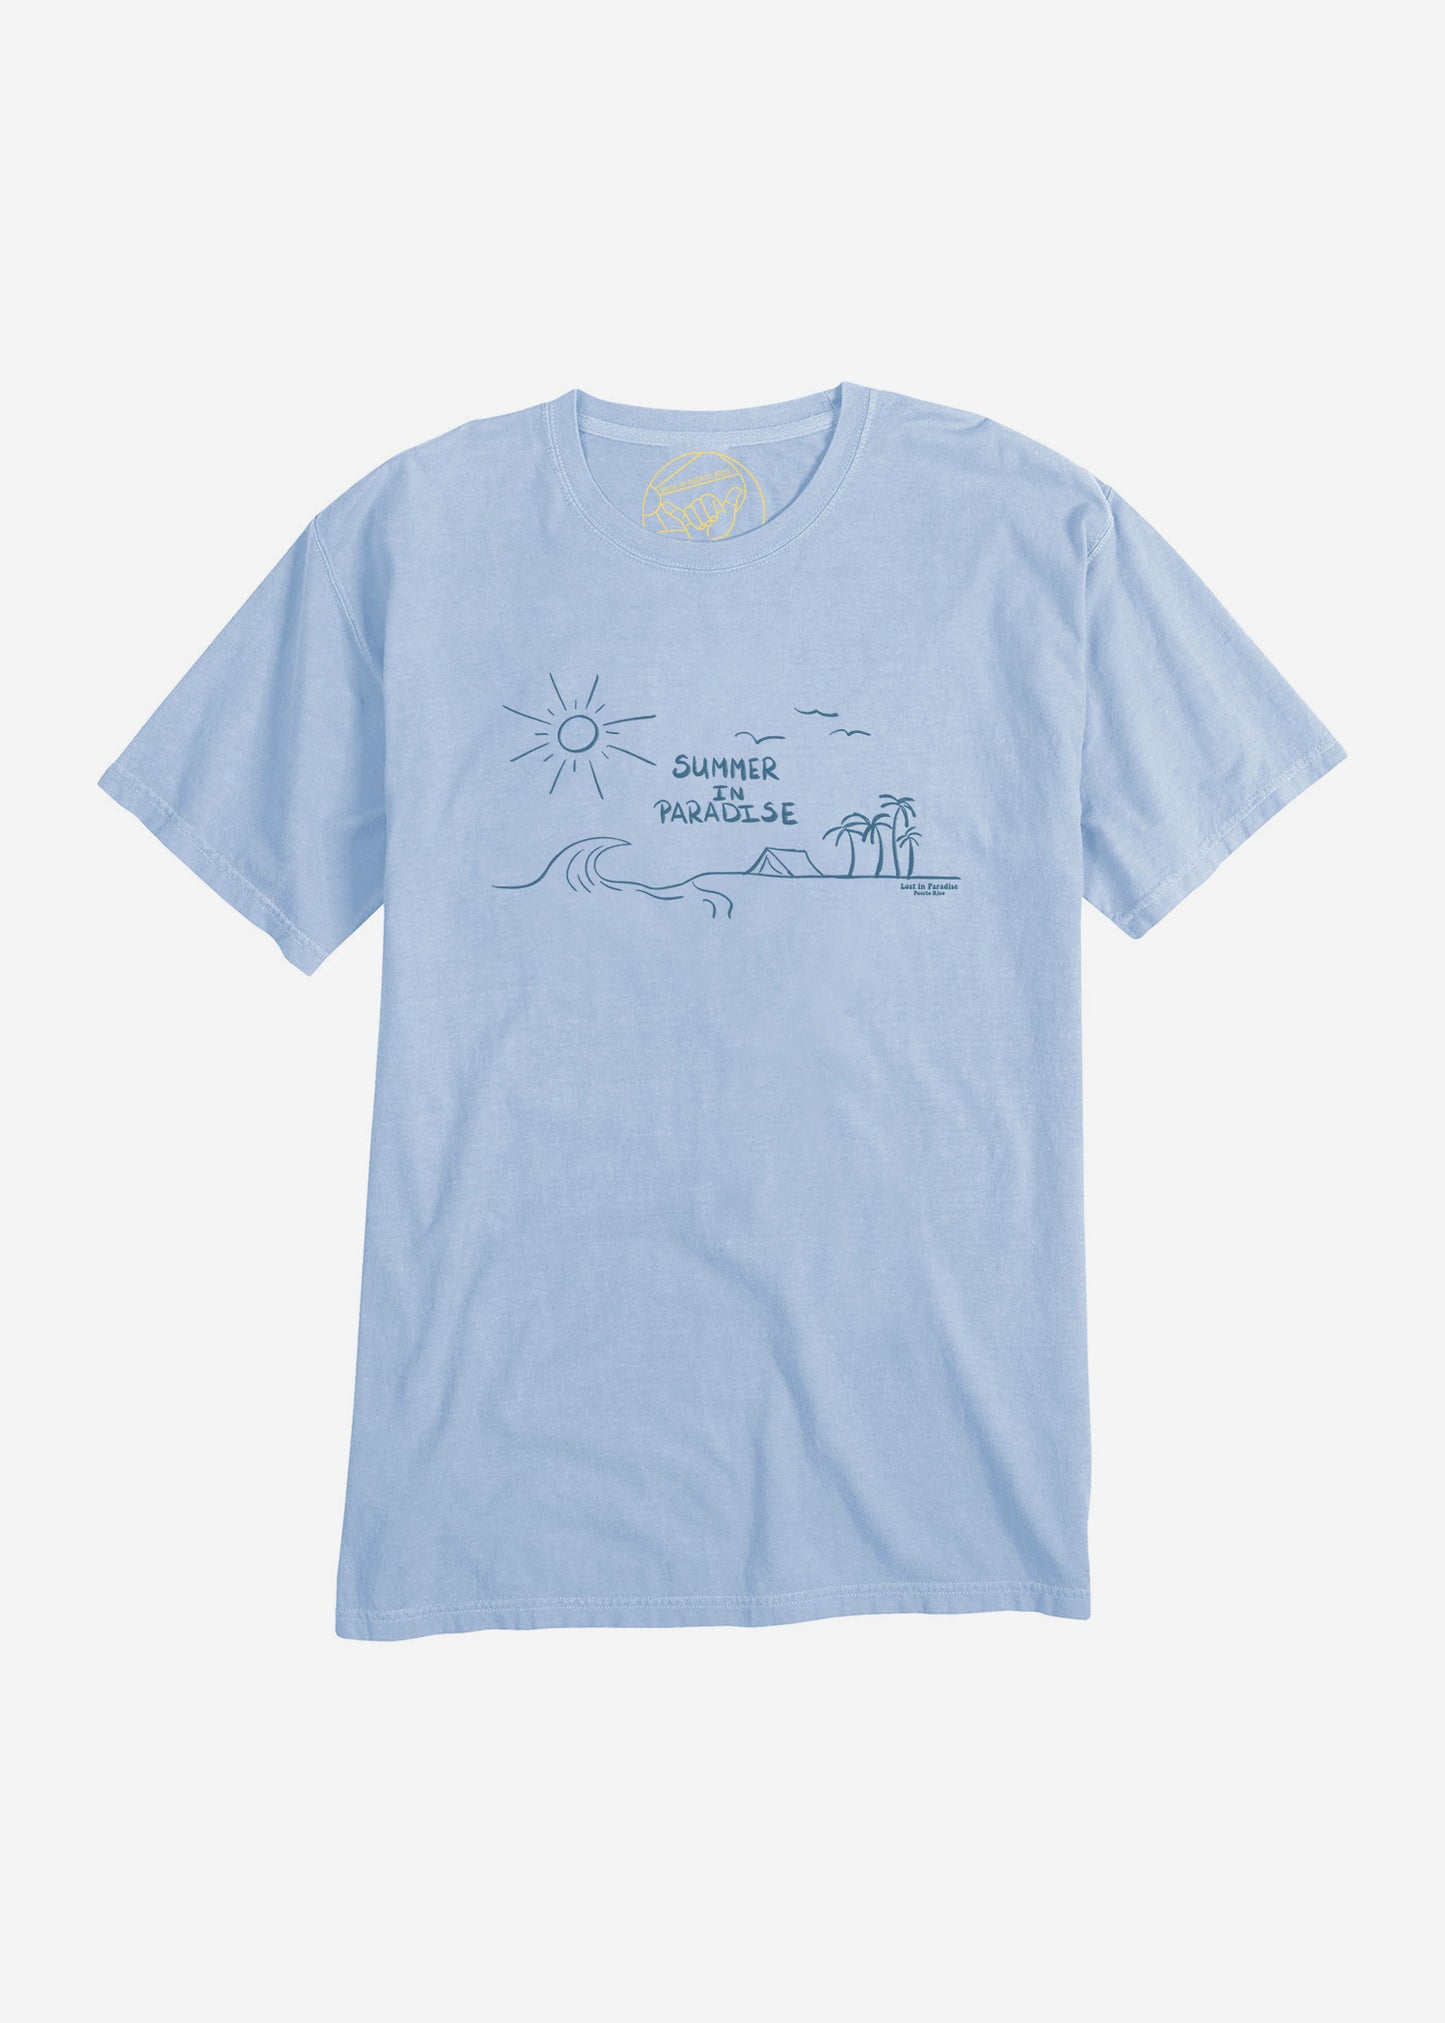 Summer in Paradise Tee Lost in Paradise